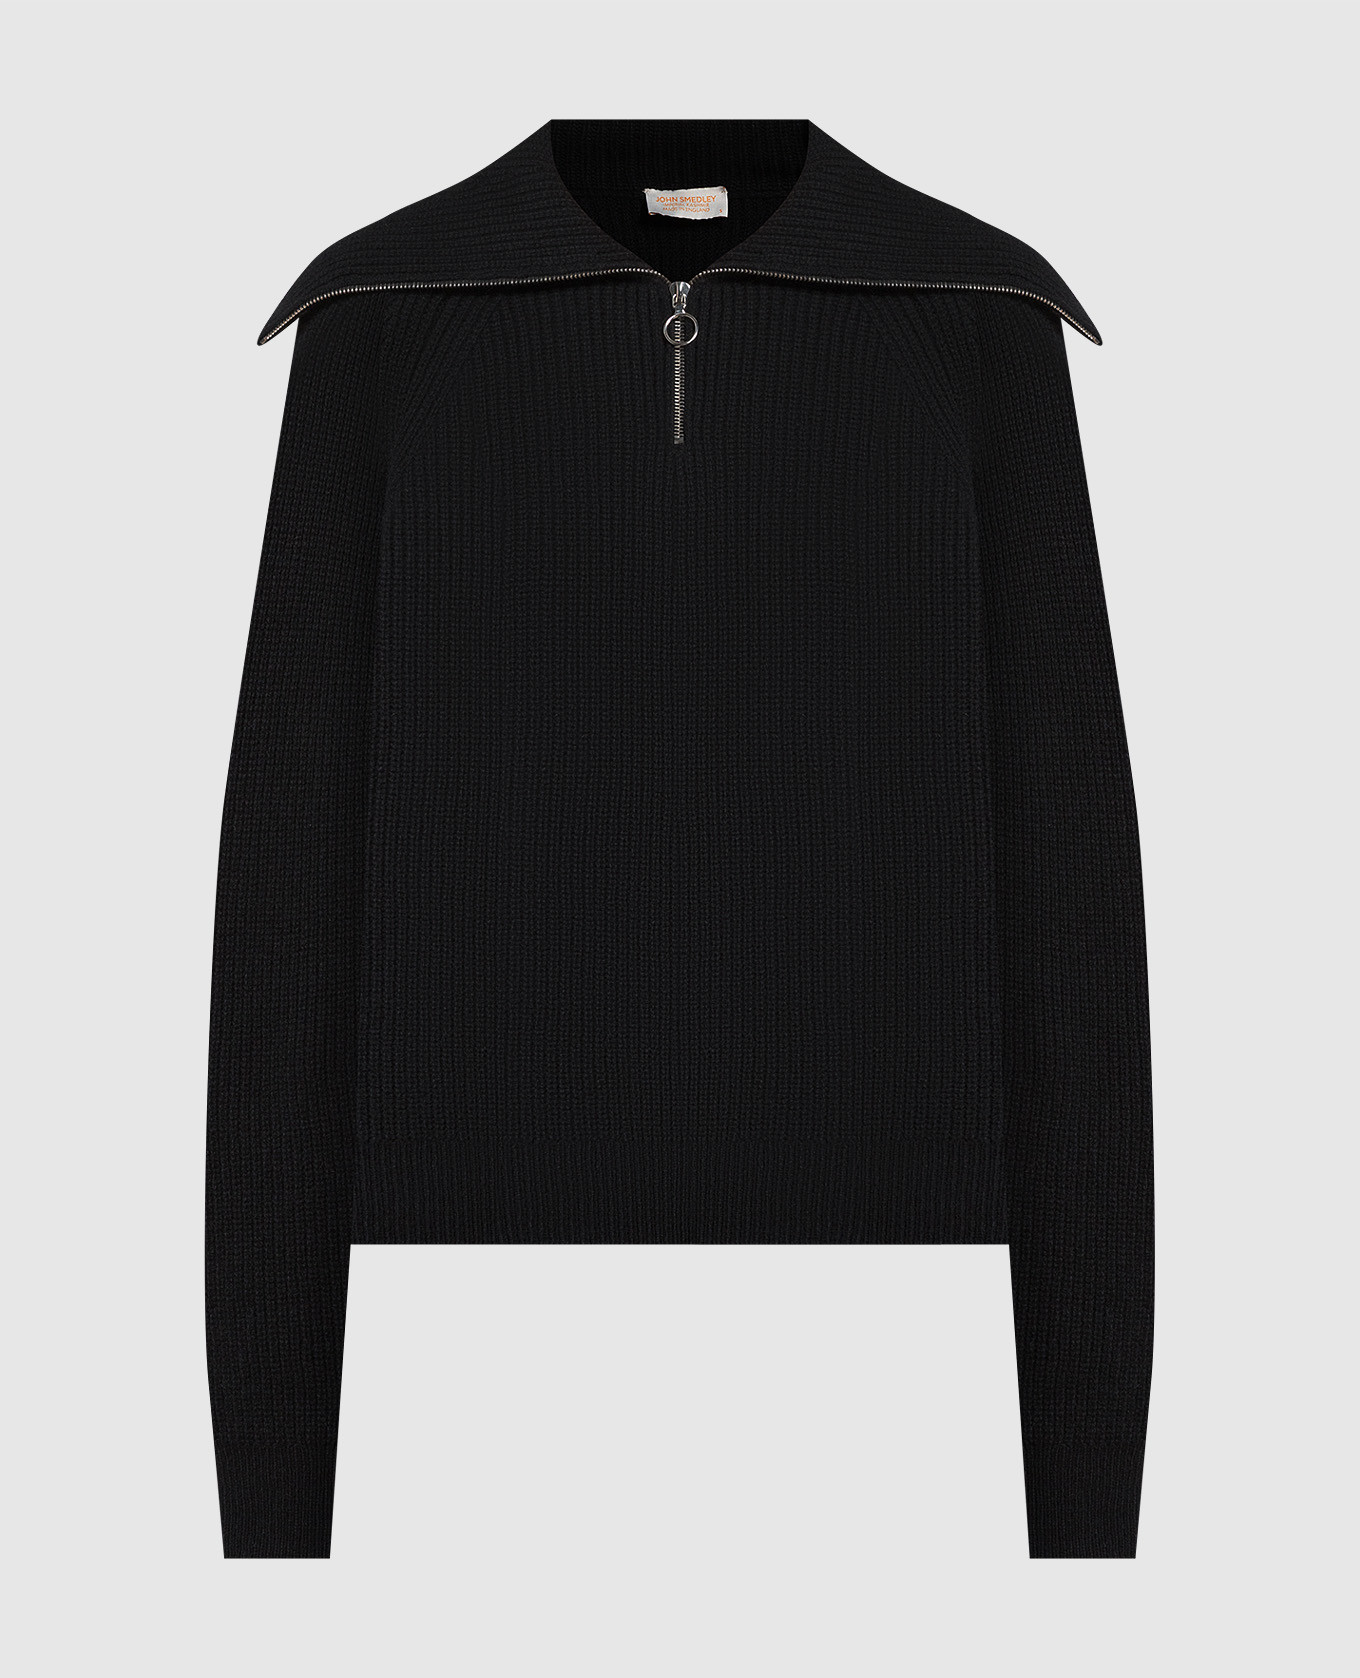 Black wool and cashmere Ladley sweater